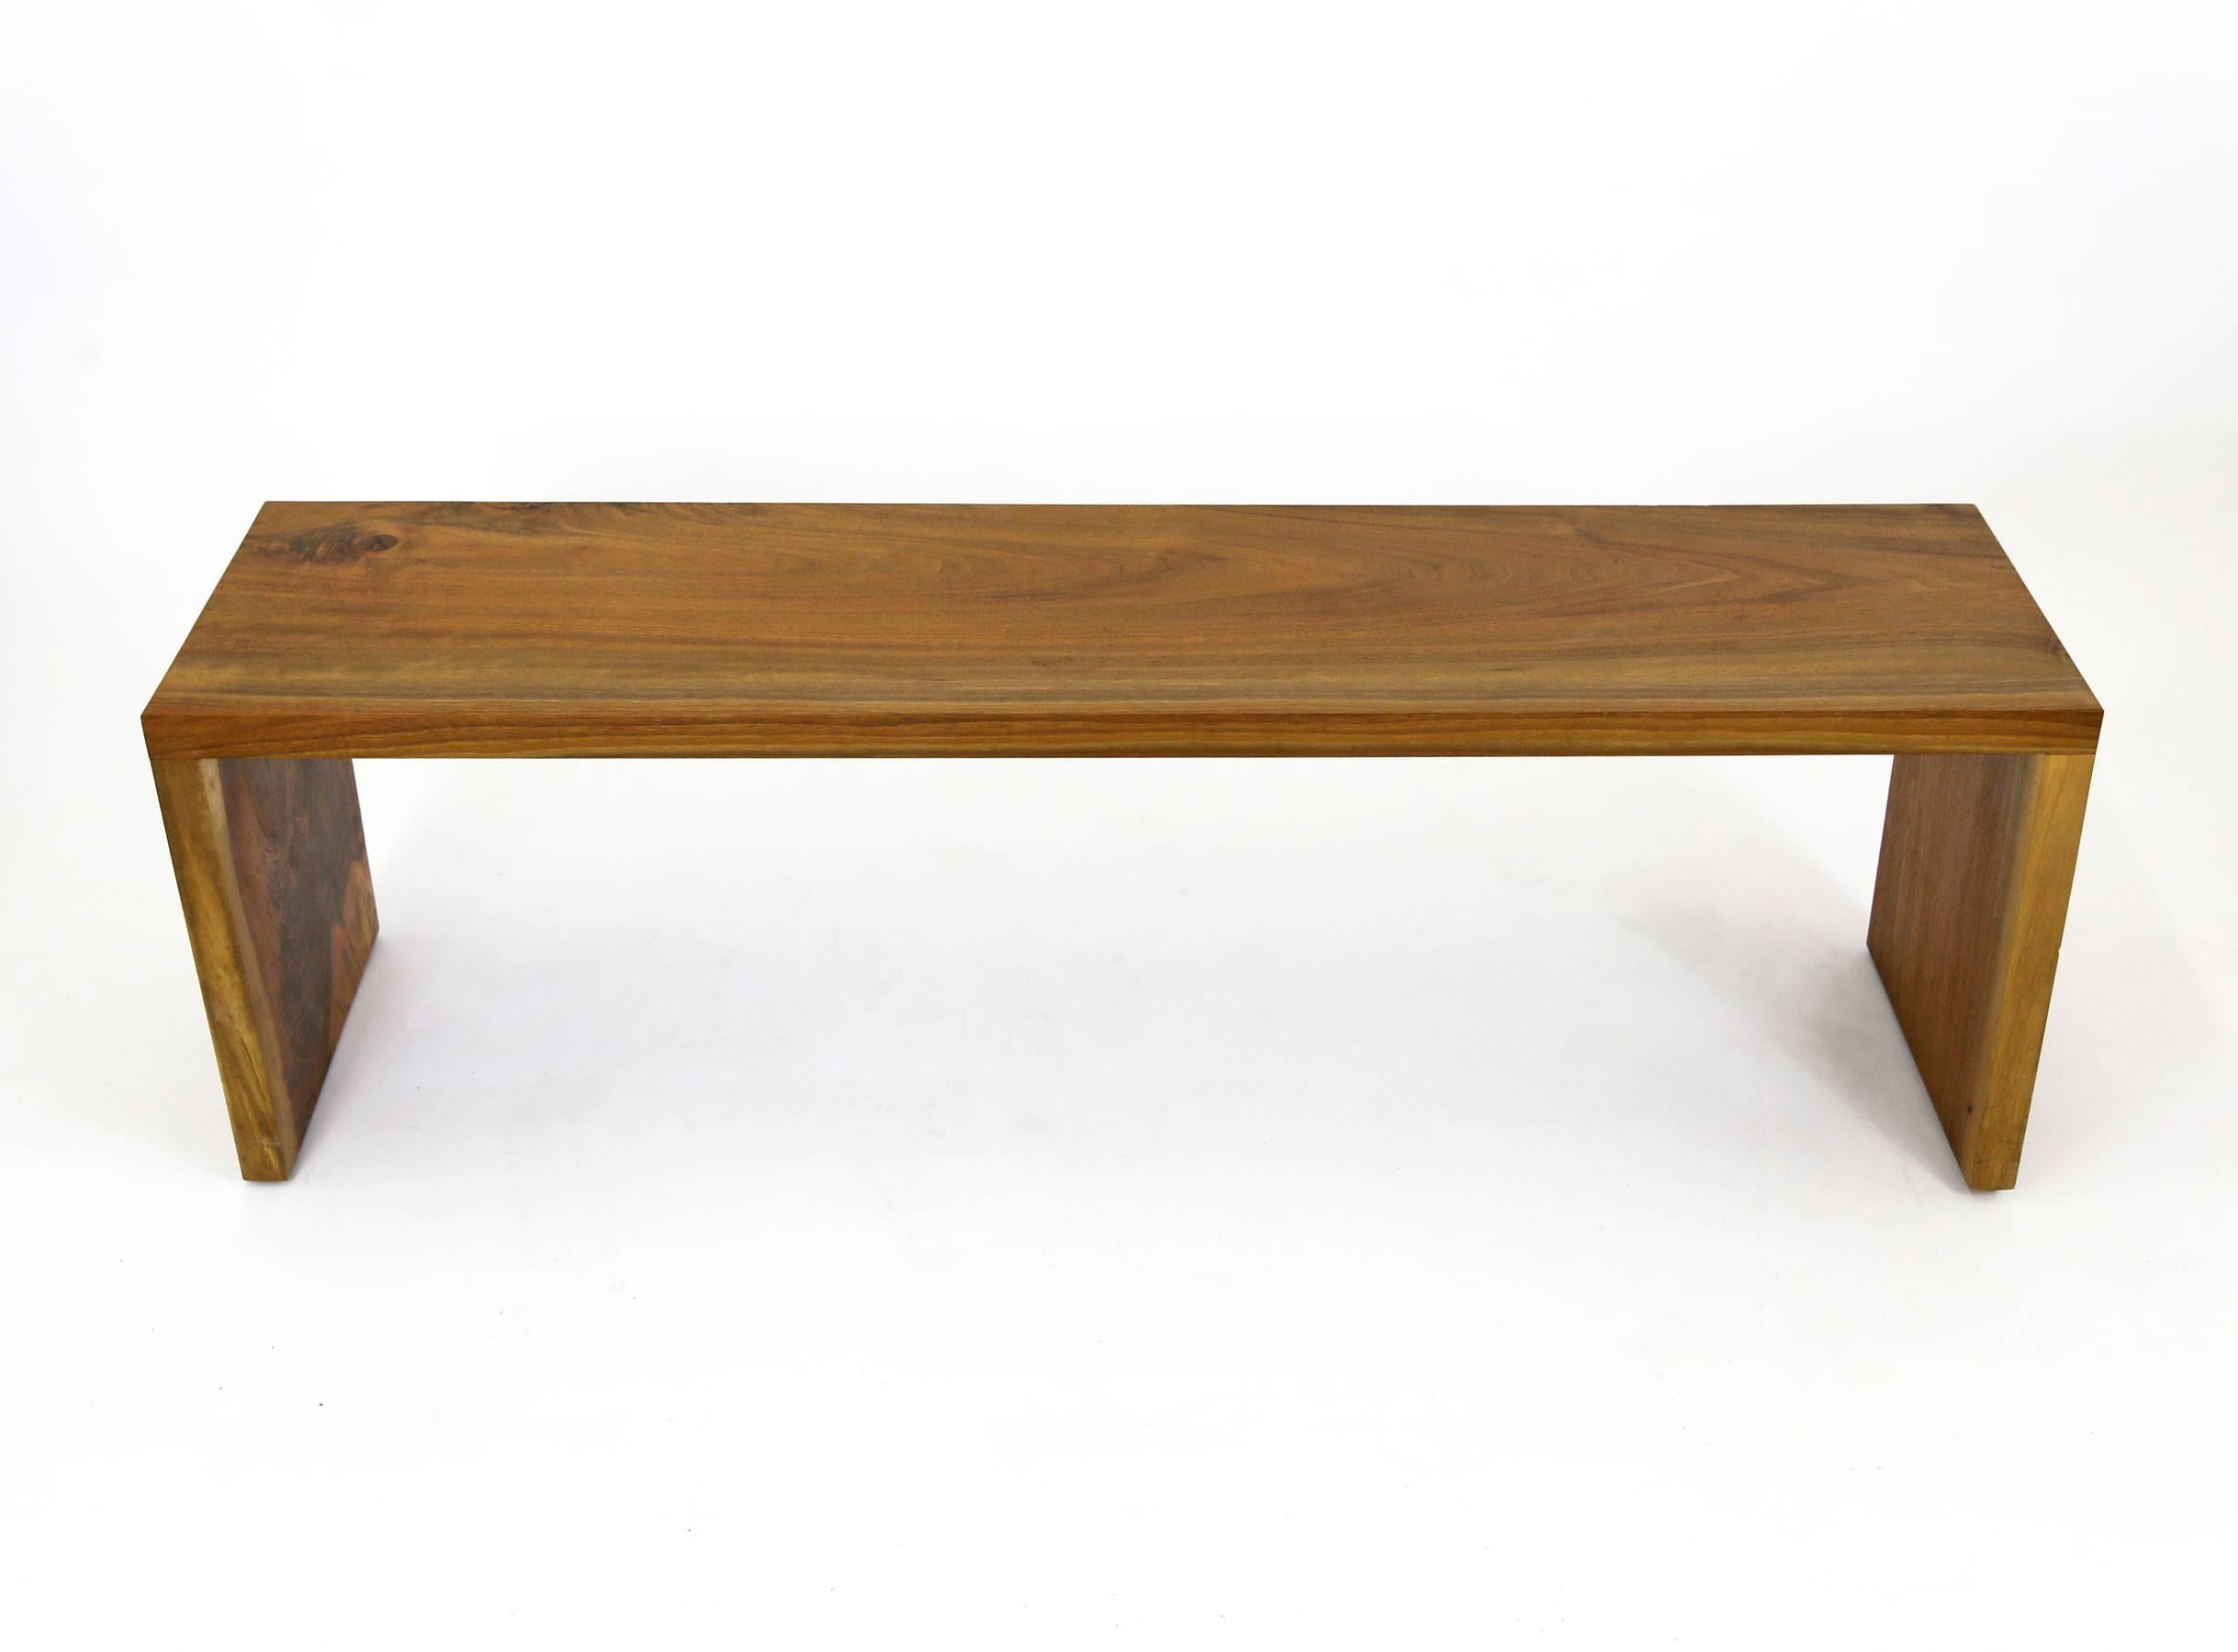 A simple, minimal hardwood bench for use in just about any setting: Residential, commercial, or hospitality, it is amazing how a bit of natural American hardwood can add warmth and authenticity to an environment!

Each bench is custom-made to order